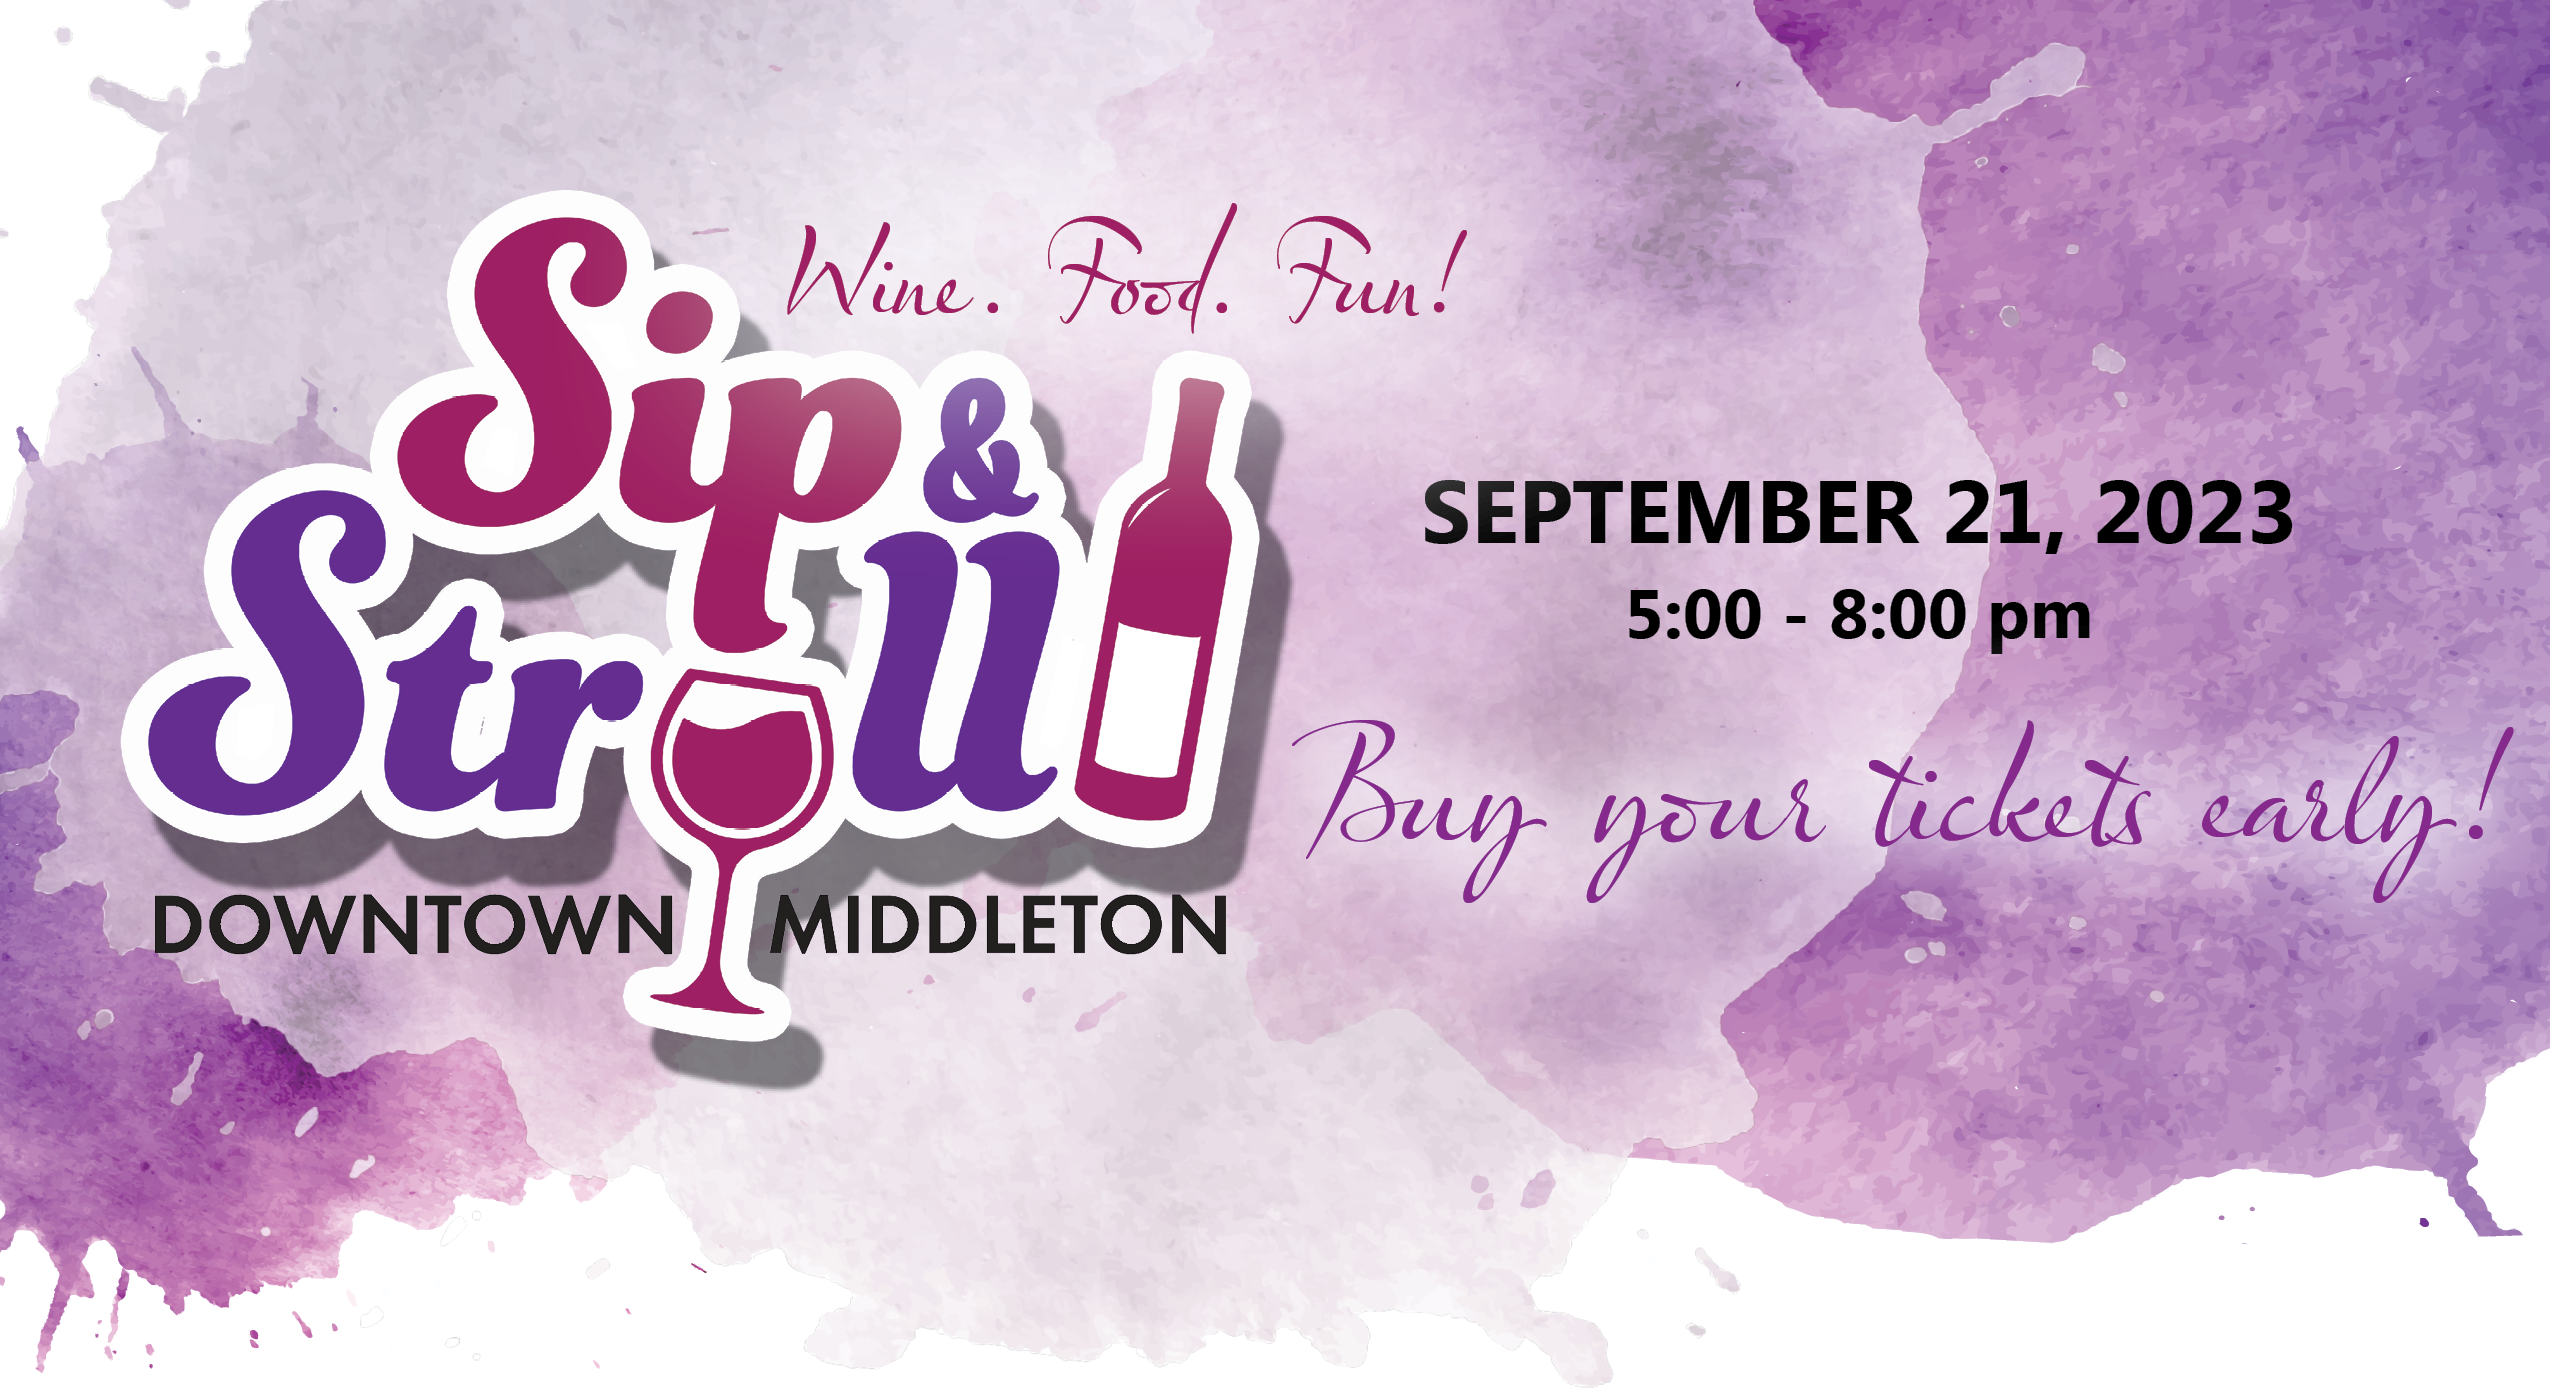 The logo for sip and stroll in downtown middleton.